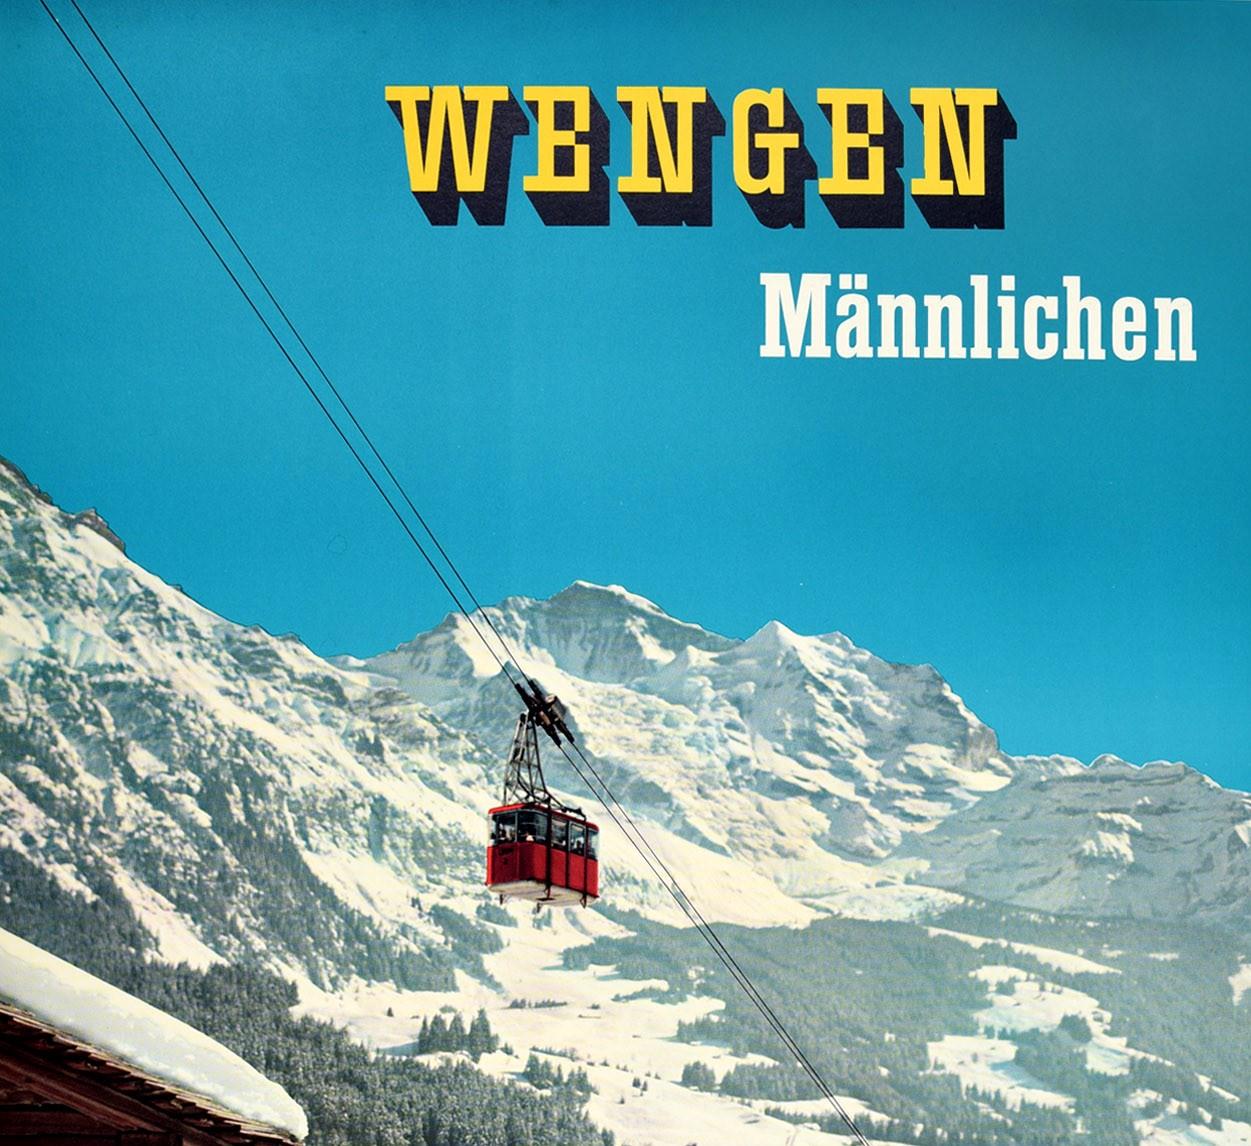 Original vintage winter sport travel poster for Mannlichen Wengen in Switzerland featuring a colorful photograph of people standing in the deep snow and sitting next to their skis leaning against a wooden chalet below a red cable car ski lift